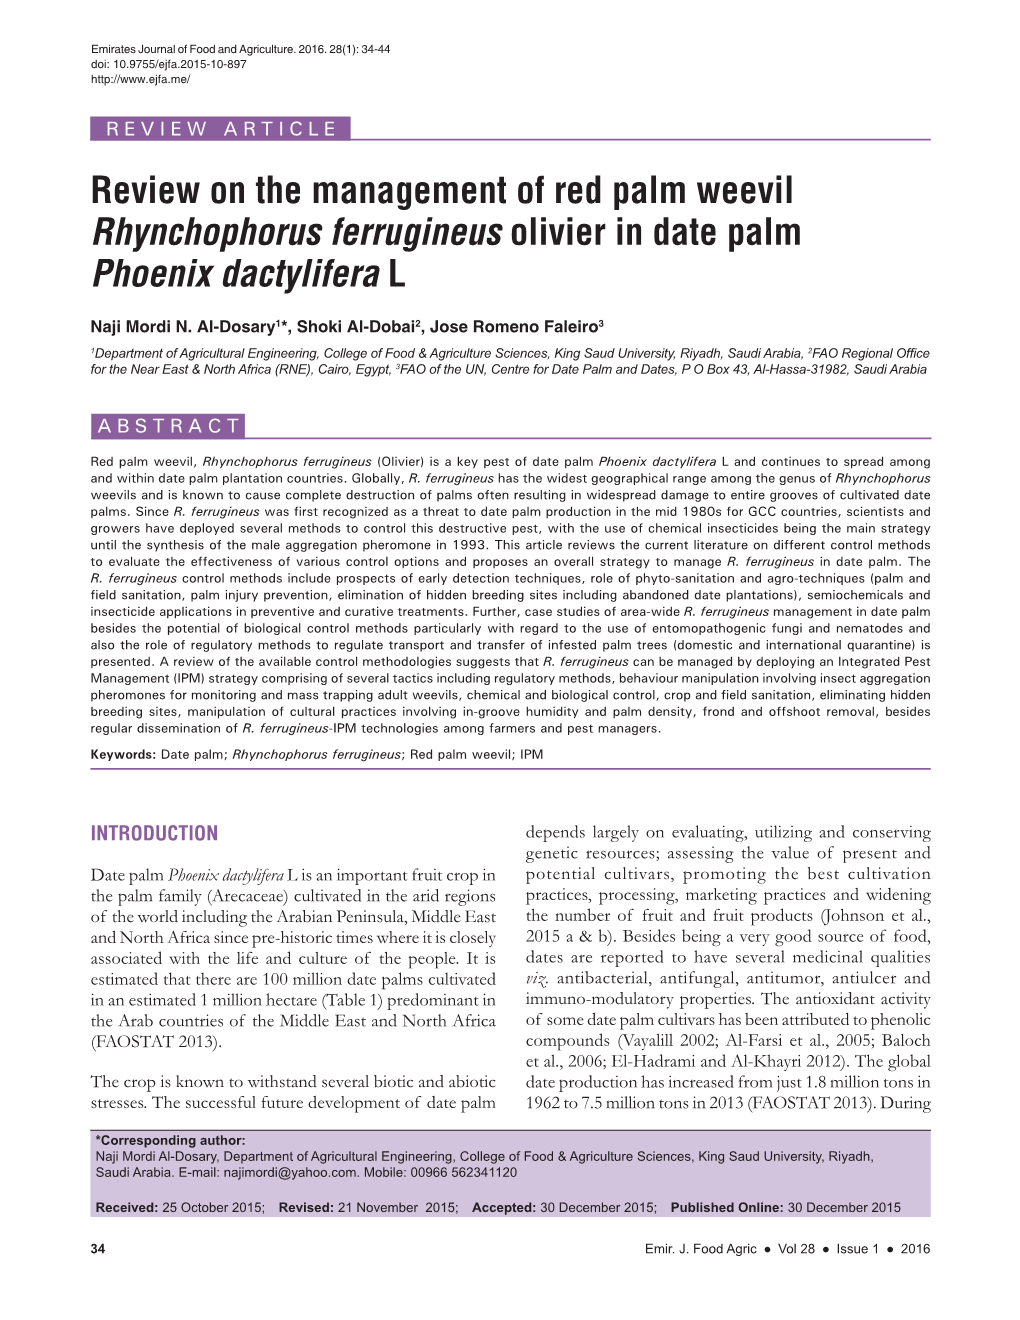 Review on the Management of Red Palm Weevil Rhynchophorus Ferrugineus Olivier in Date Palm Phoenix Dactylifera L